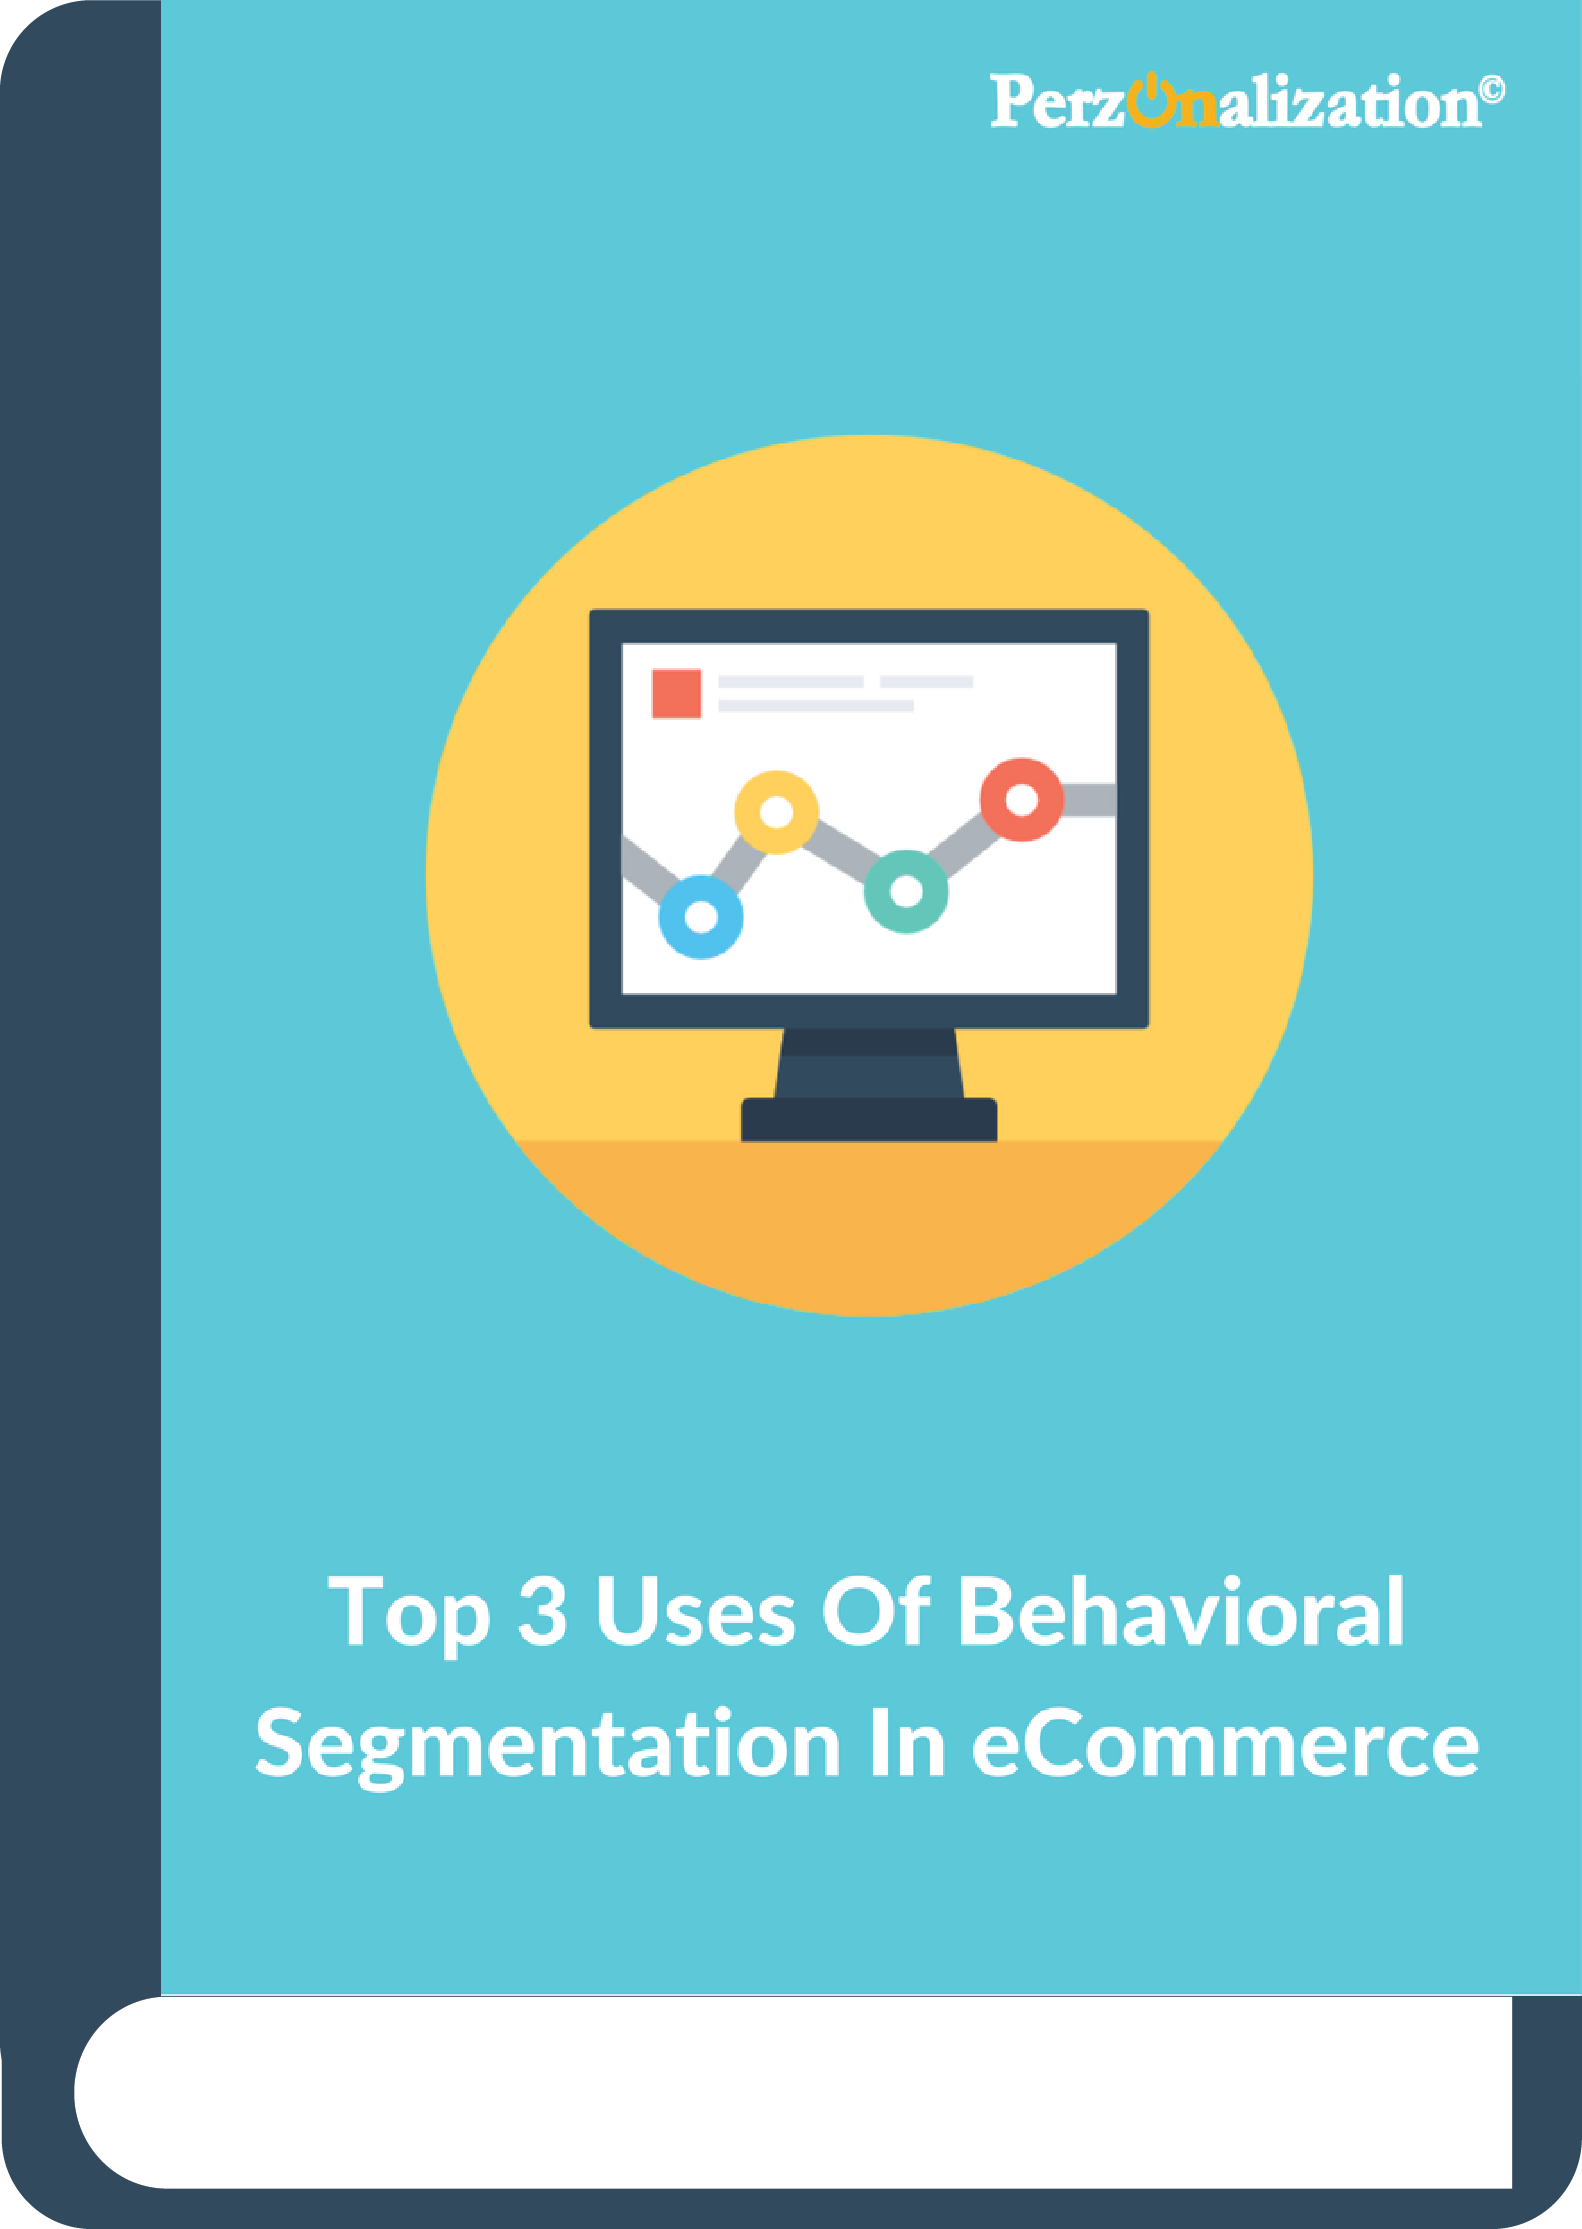 Trying to Improve Your Customers' Interaction With Your Online Store? Find Out How Behavioral Segmentation and Behavioral Targeting Can Save You Months!